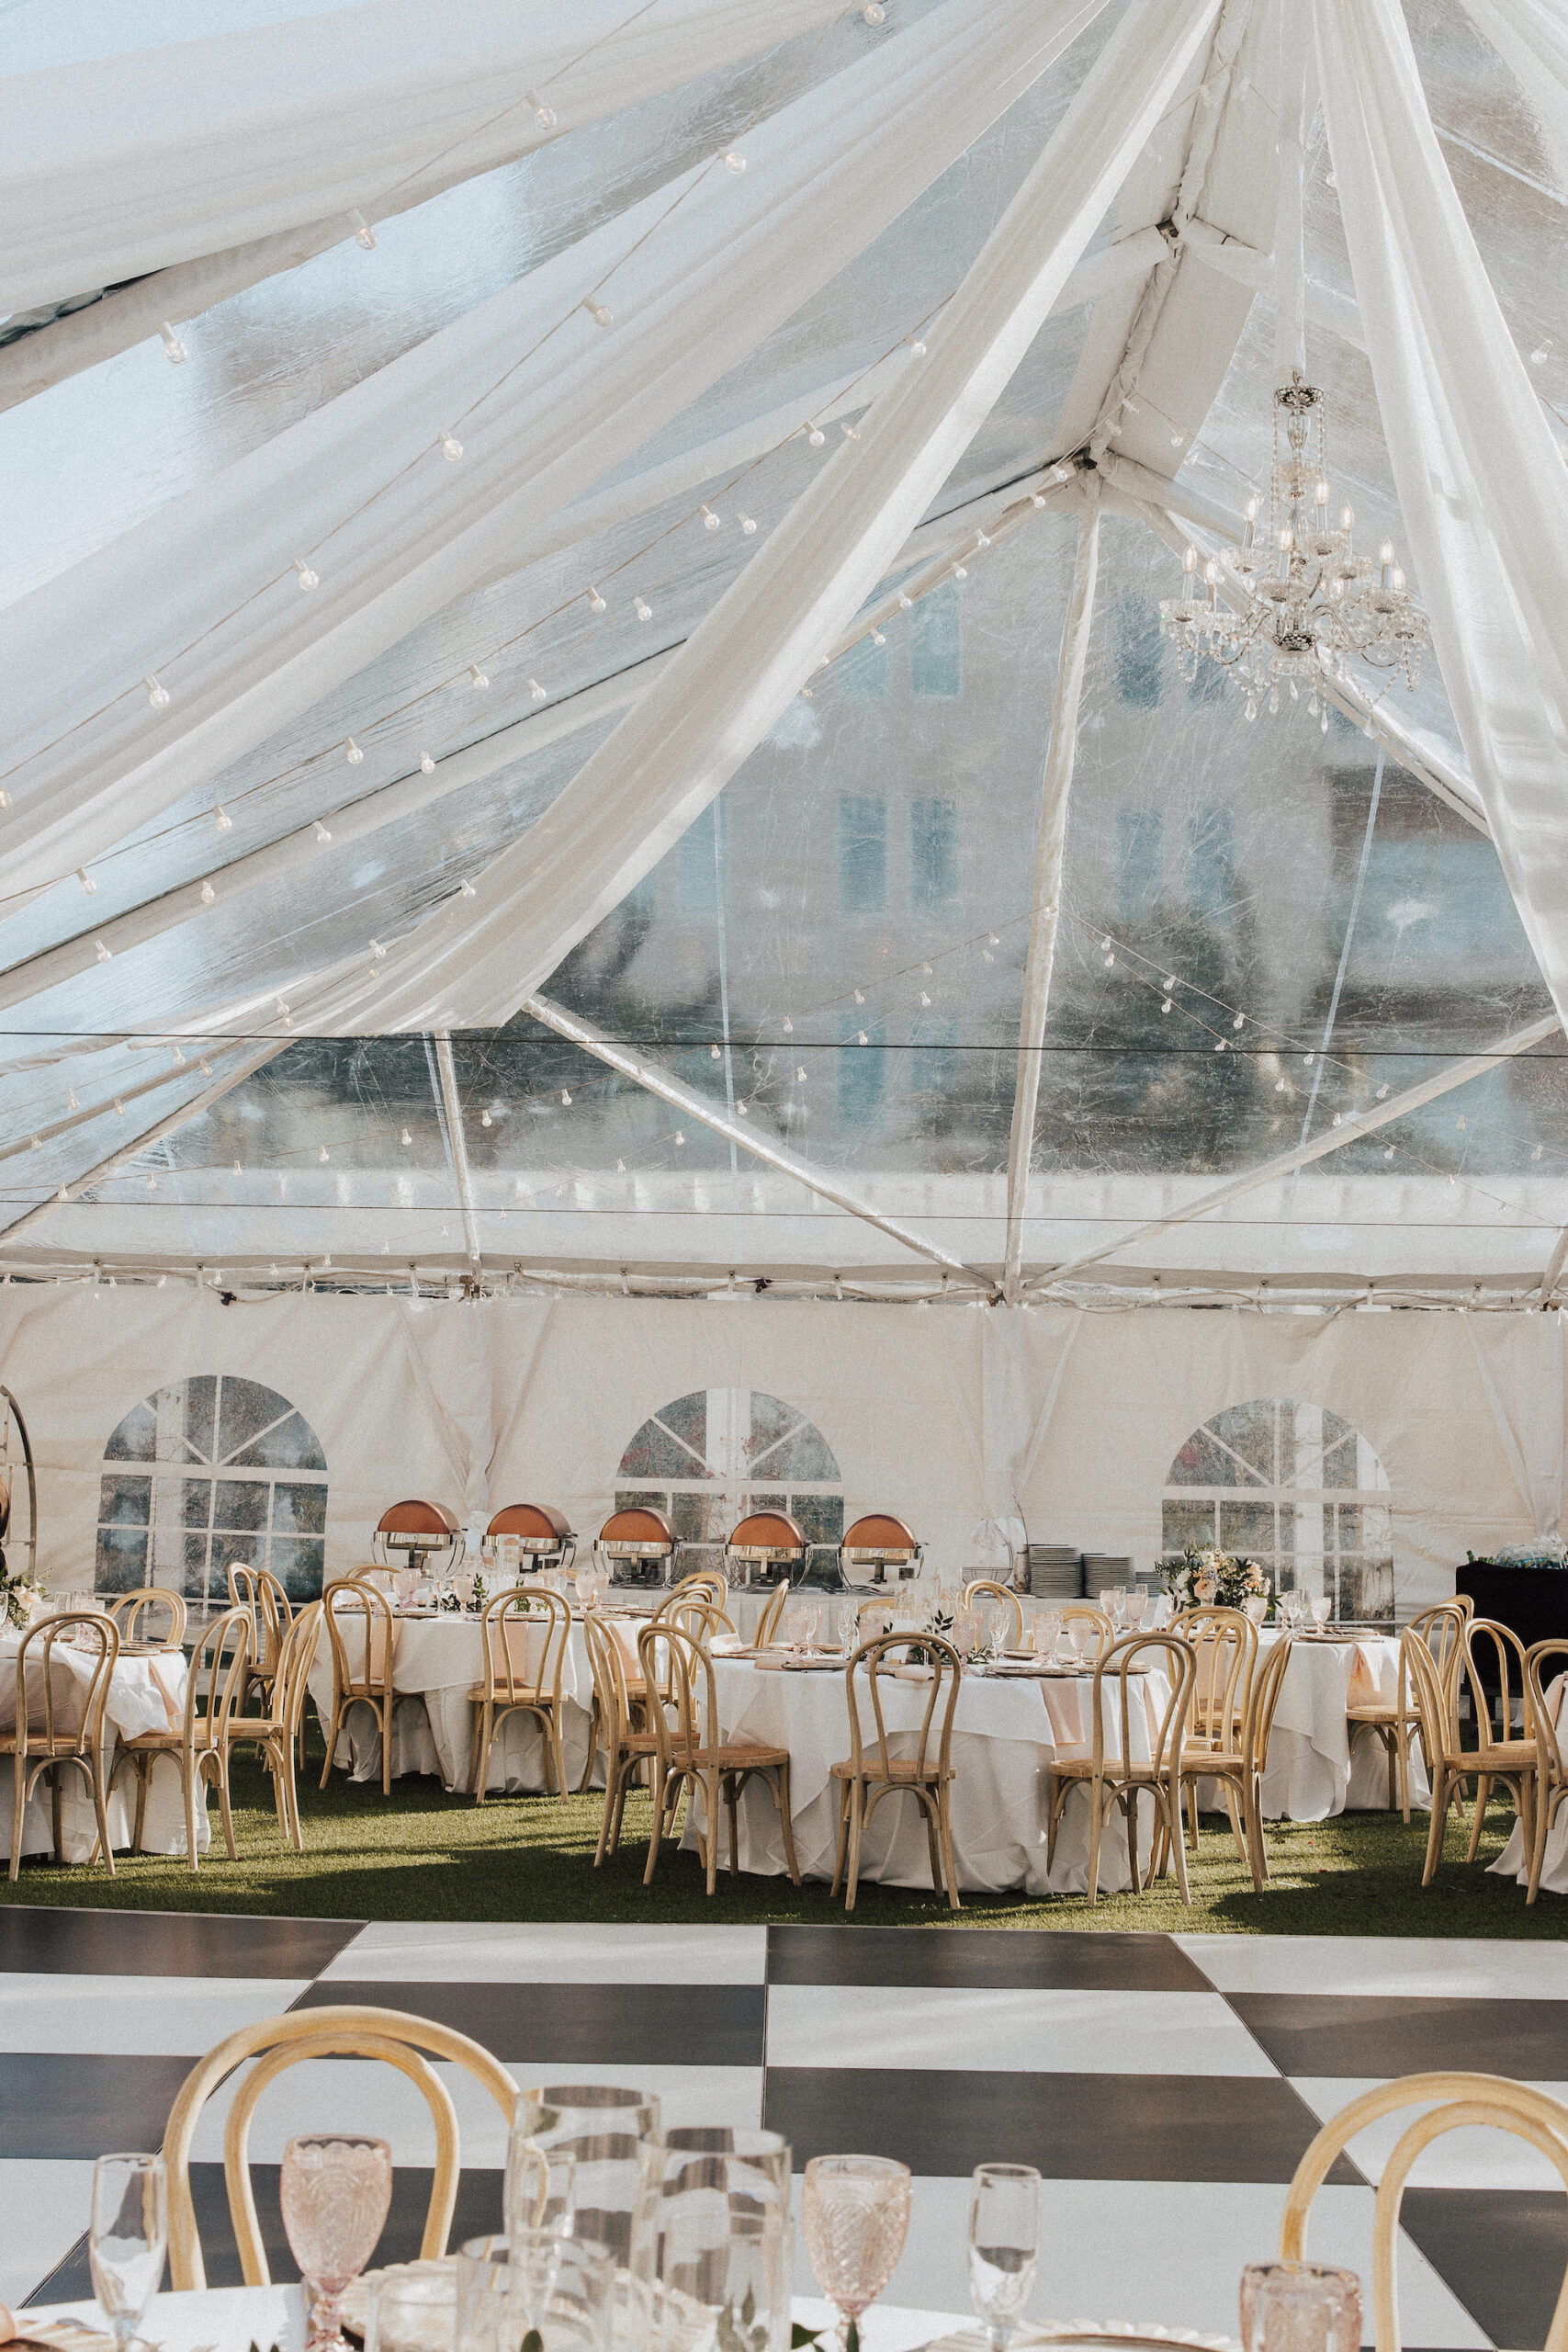 Elegant Garden Clear Tent Wedding Reception with Market Lights, White Drapery, Chandeliers, and Black and White Dance Floor | Outdoor Reception Ideals